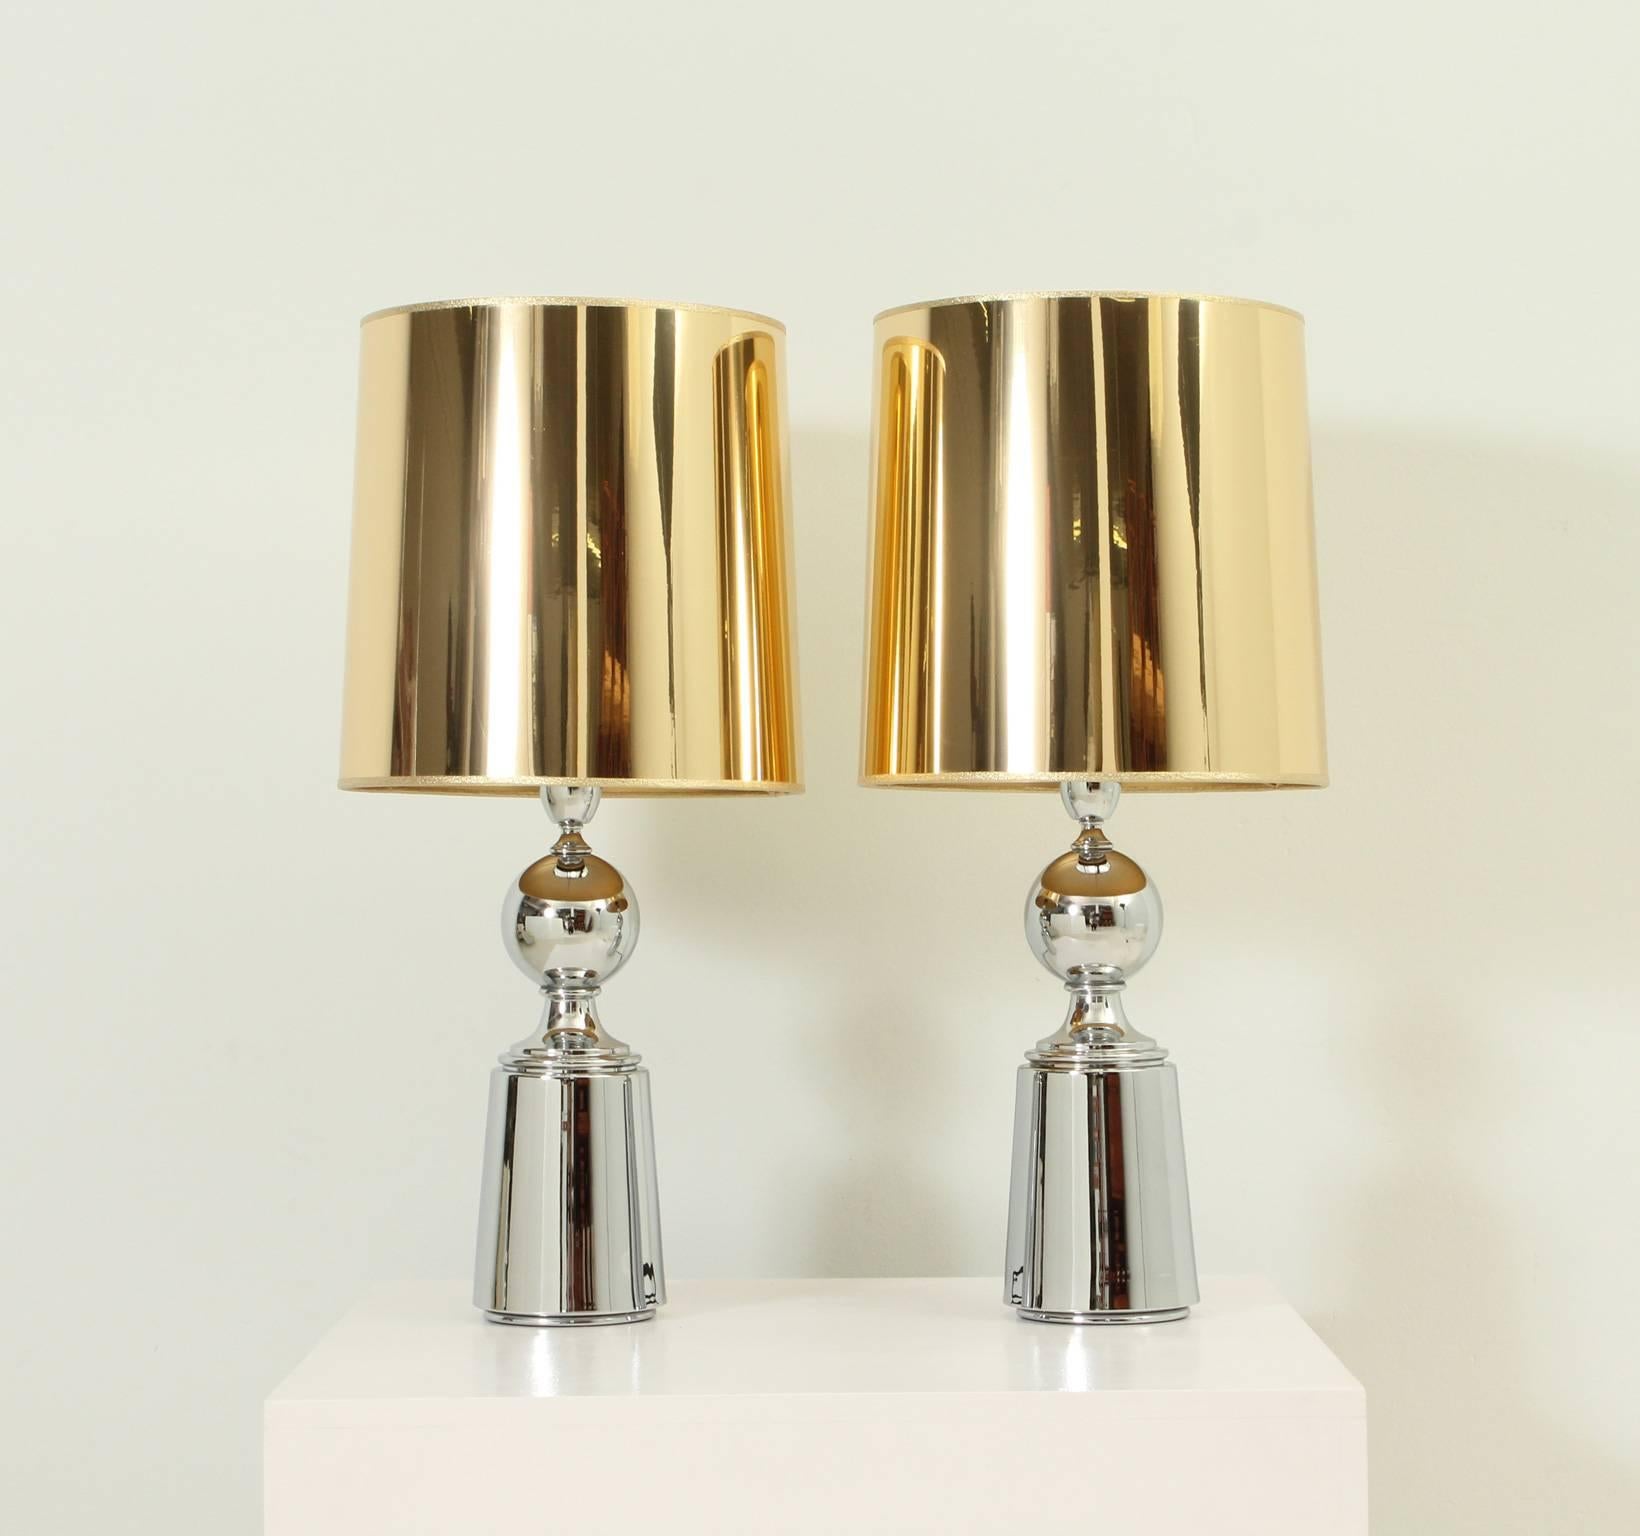 Pair of table lamps designed in 1970s by Metalarte, Spain. Chromed metal base with new gold plastic shade.